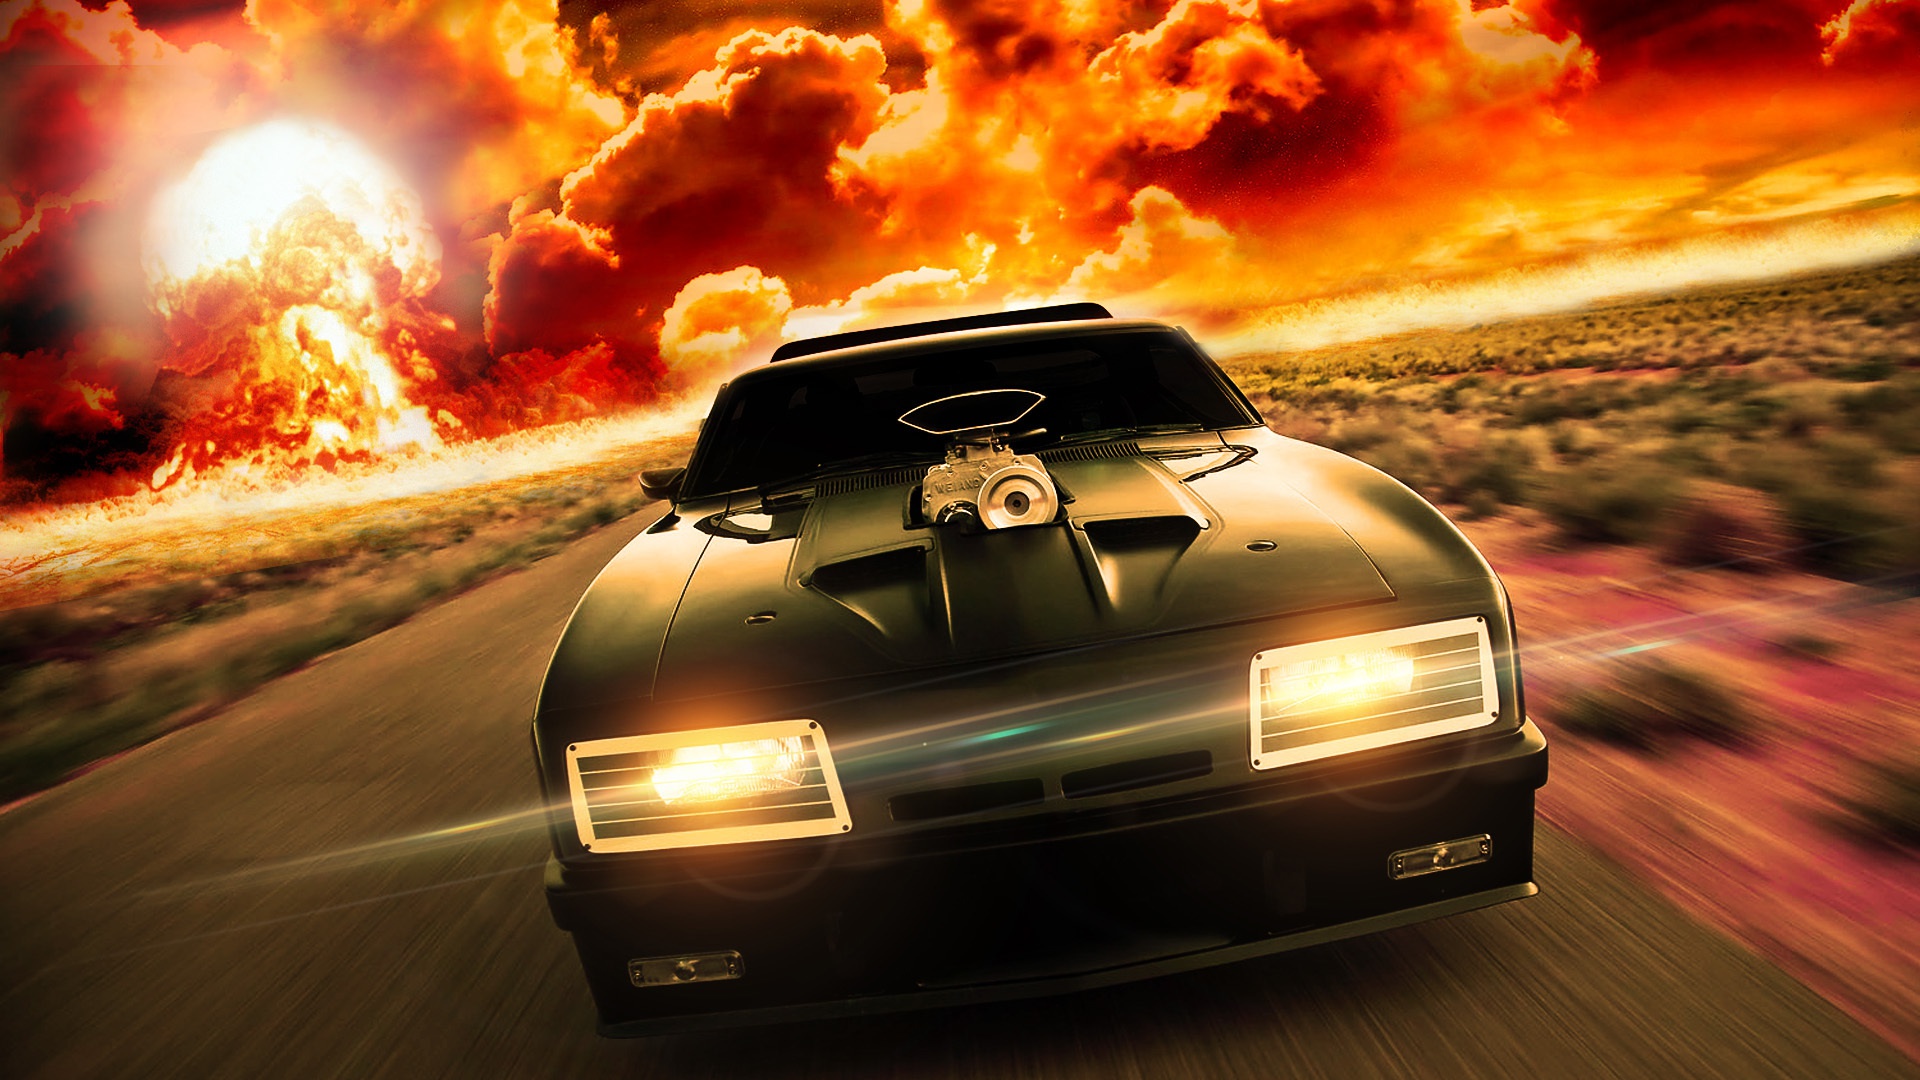 Wallpapers mad Max explosion Ford Falcon Pursuit Special on the desktop